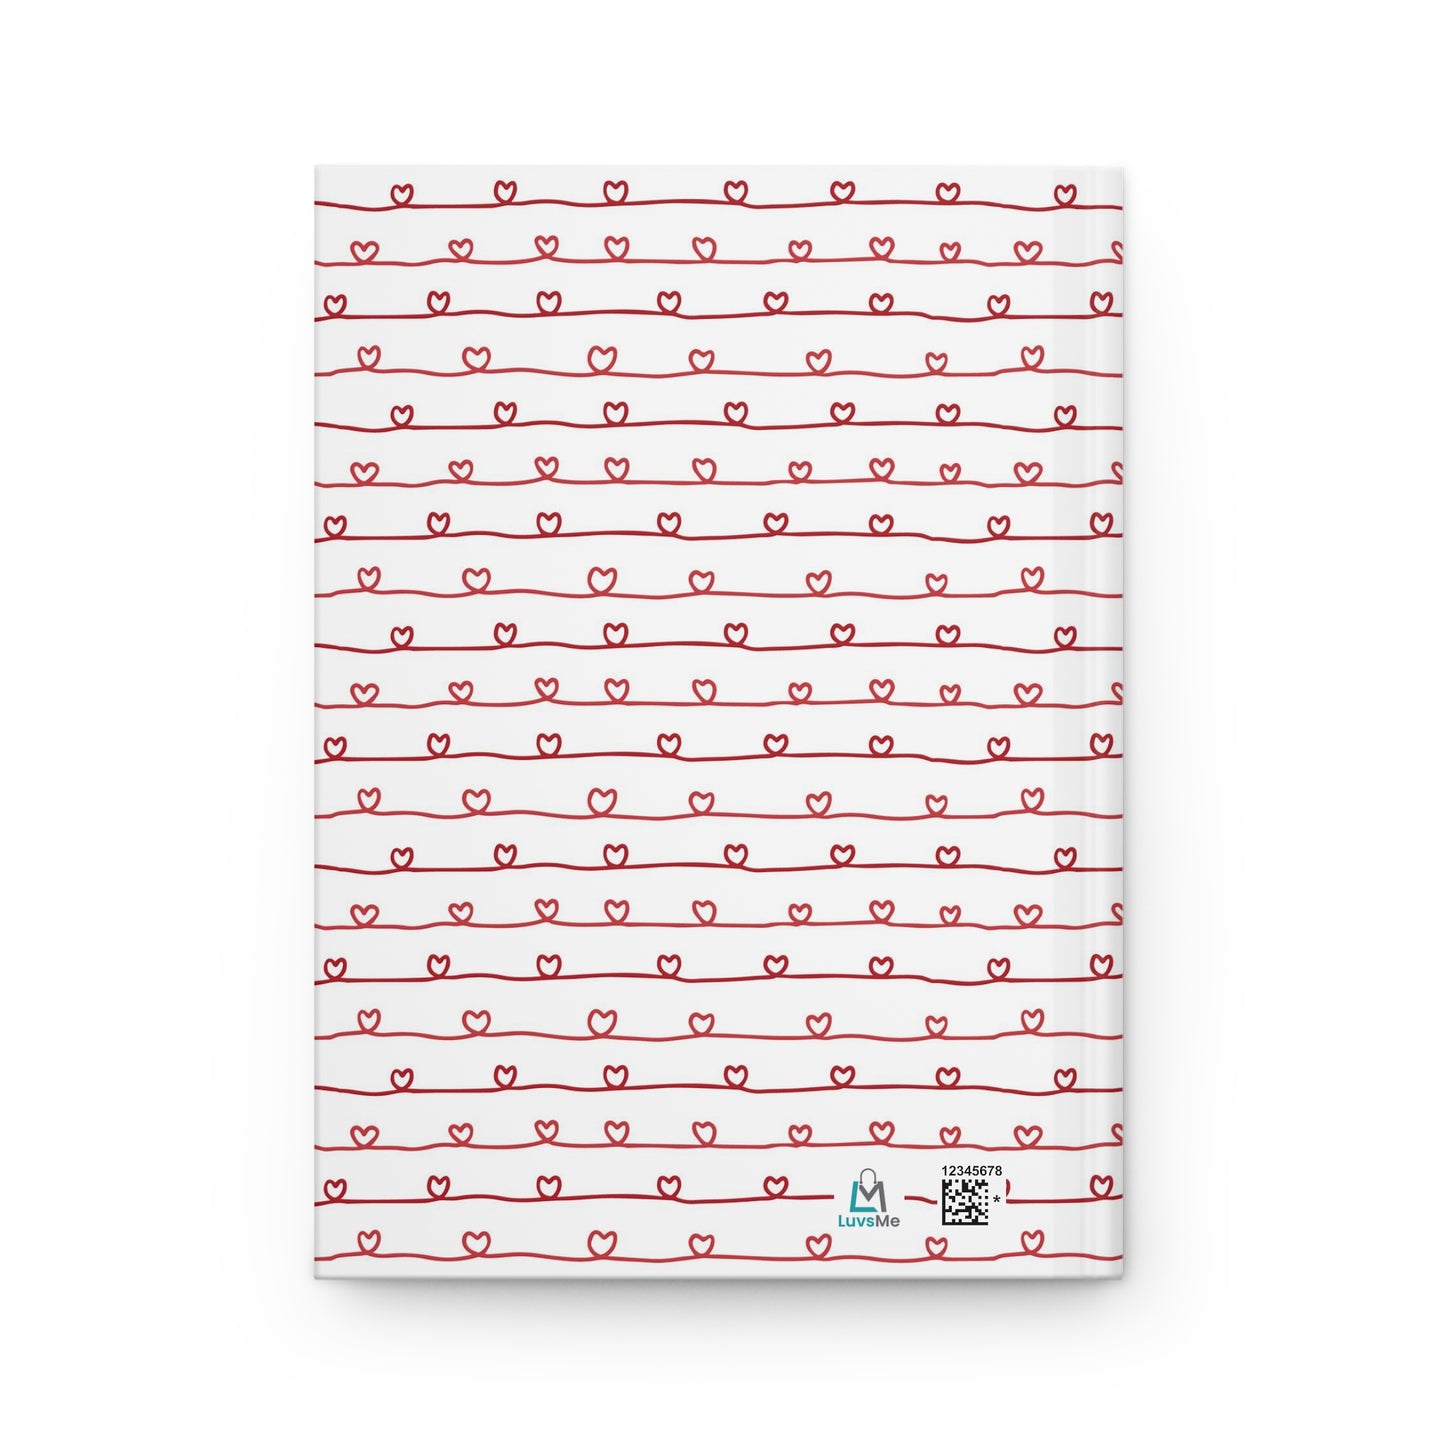 Do What Makes Your SOUL HAPPY - White with Red Script Hearts - Hardcover Lined Journal Matte